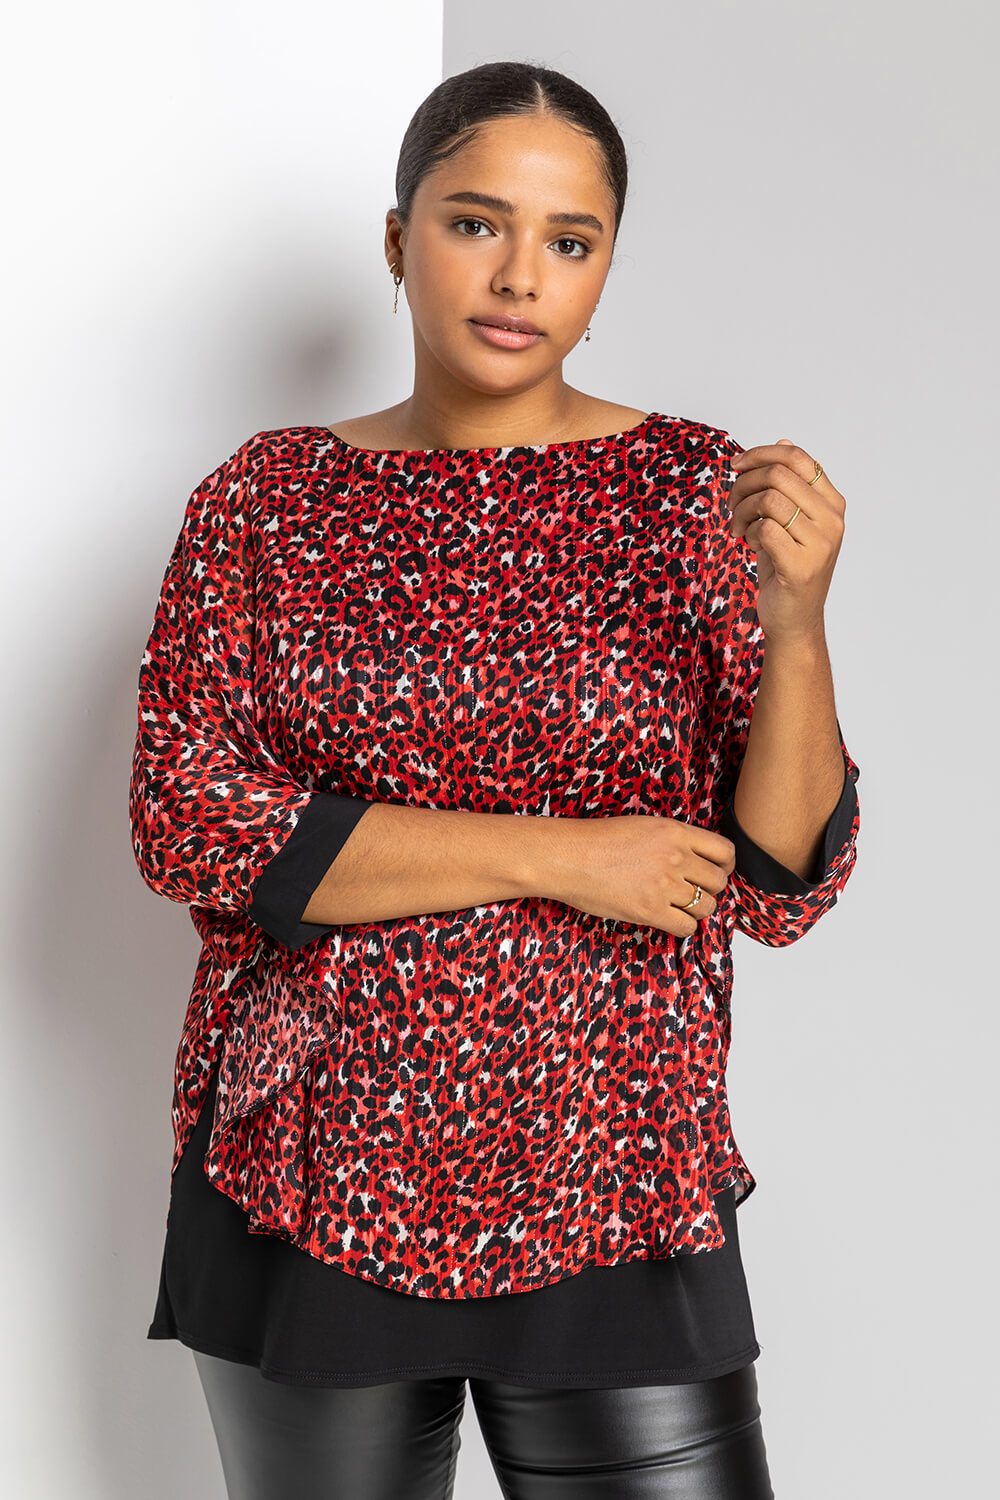 Red Curve Animal Print Overlay Top, Image 5 of 5